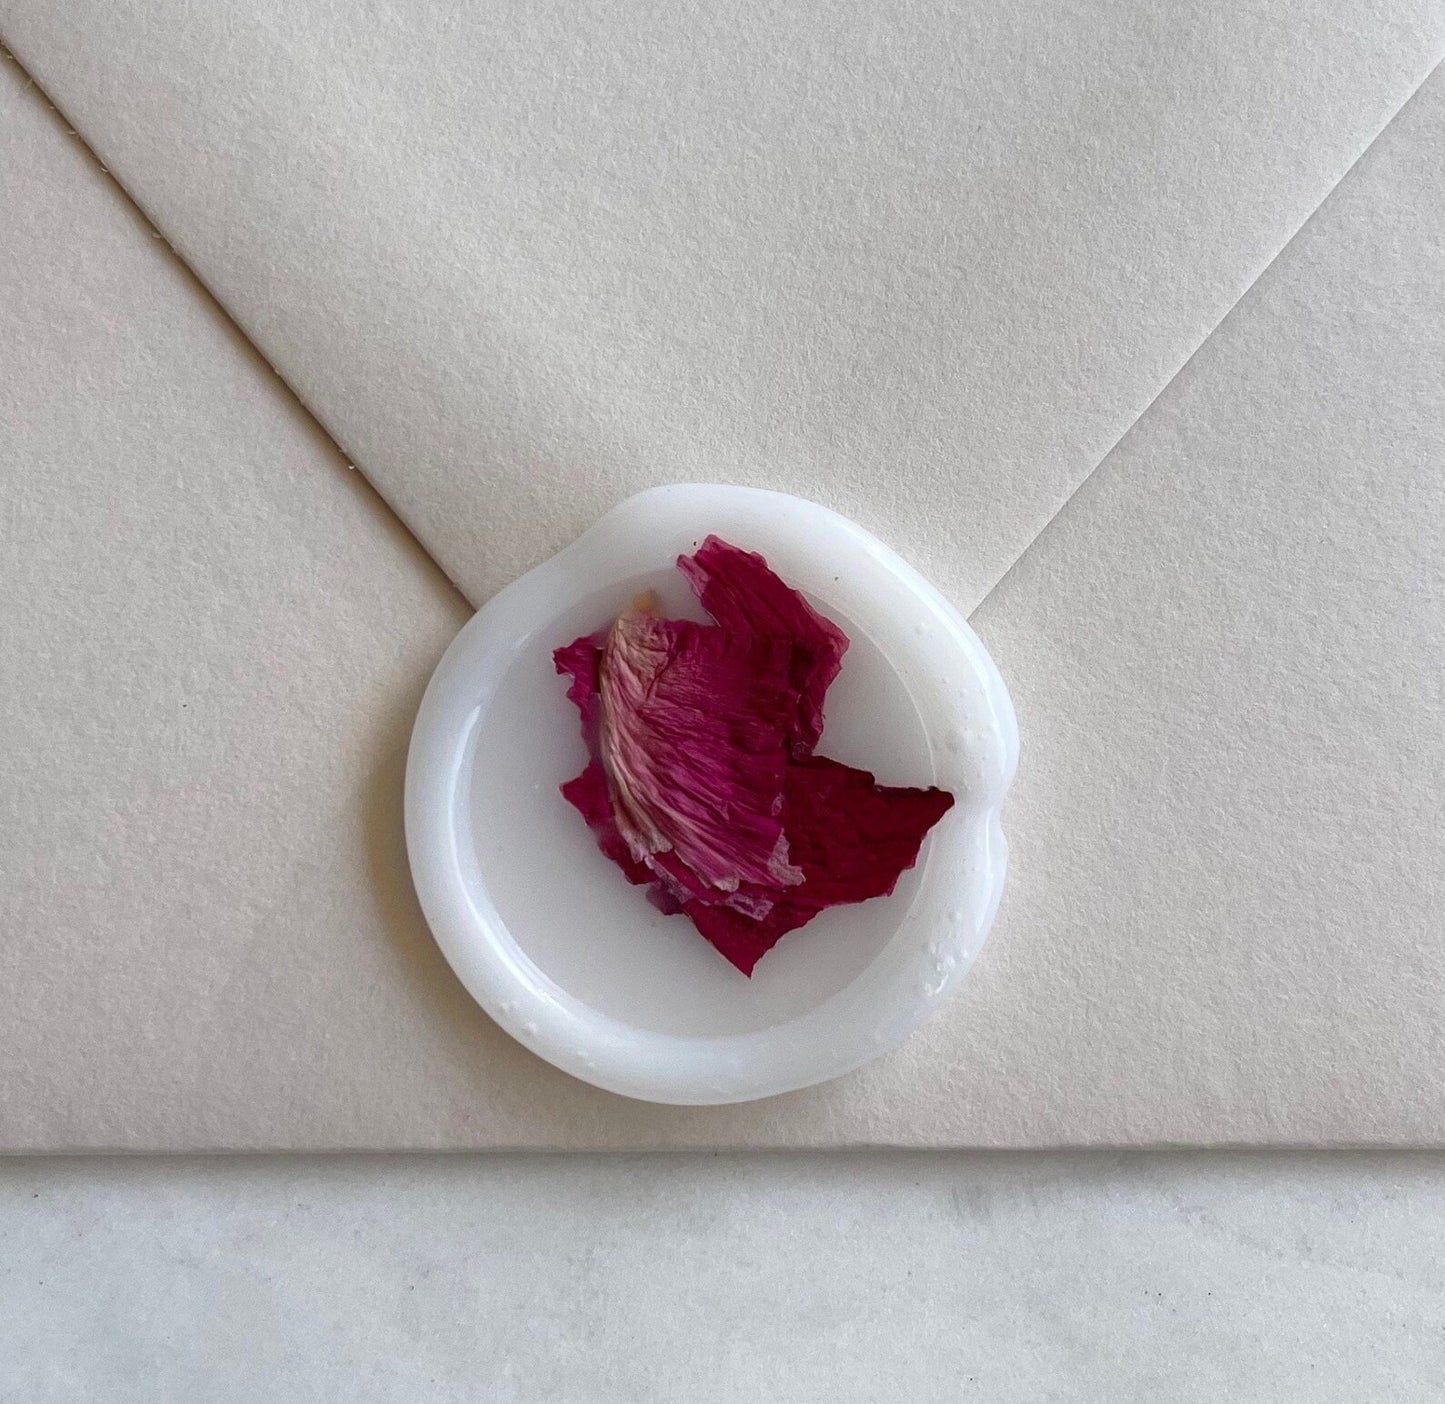 Dried Rose Wax Seals - Vellum Rose Petal Wax Seal Sticker- Adhesive Already Applied - Ships from Texas - Megan Bruce Designs